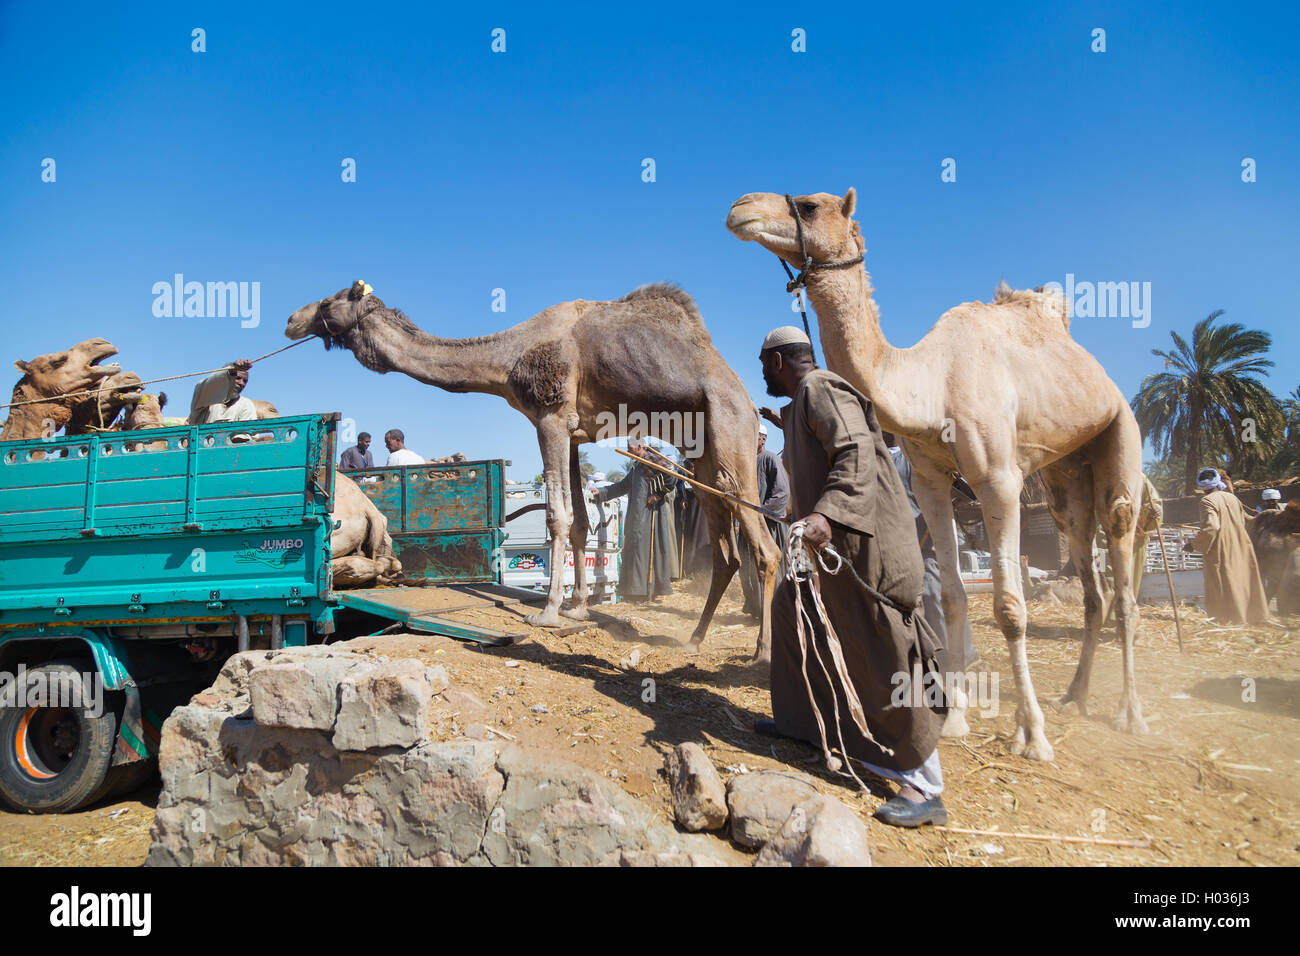 DARAW, EGYPT - FEBRUARY 6, 2016: Local camel salesmen on Camel market loading camels to trucks. Stock Photo